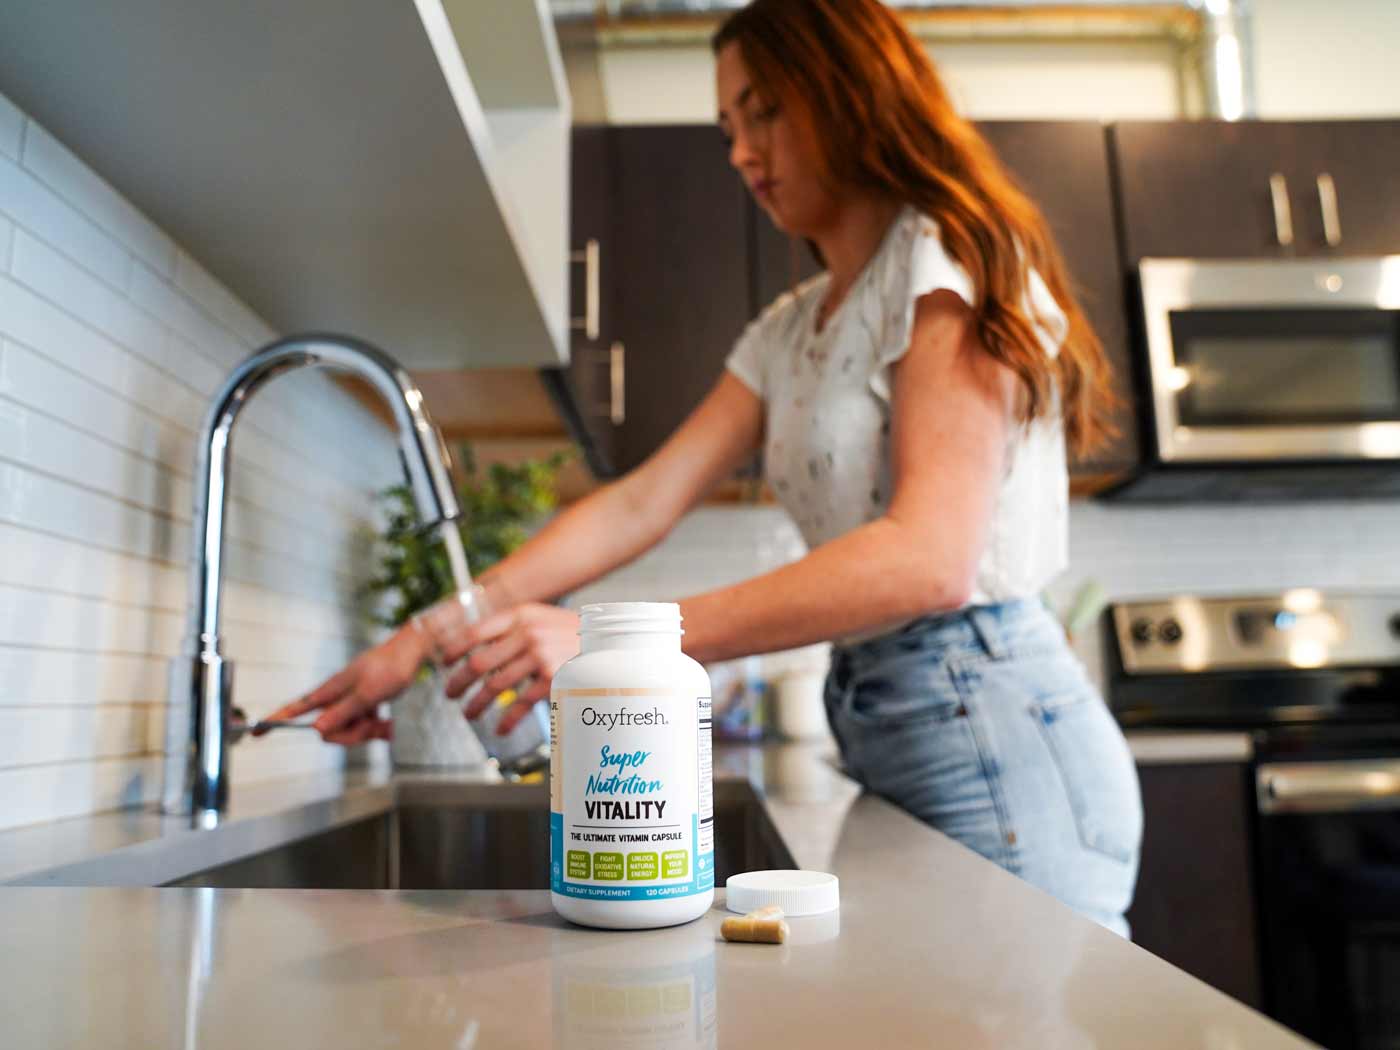 woman-pouring-water-into-a-glass-preparing-to-take-an-oxyfresh-super-nutrition-vitality-capsule-which-is-laying-on-the-counter-in-the-foreground